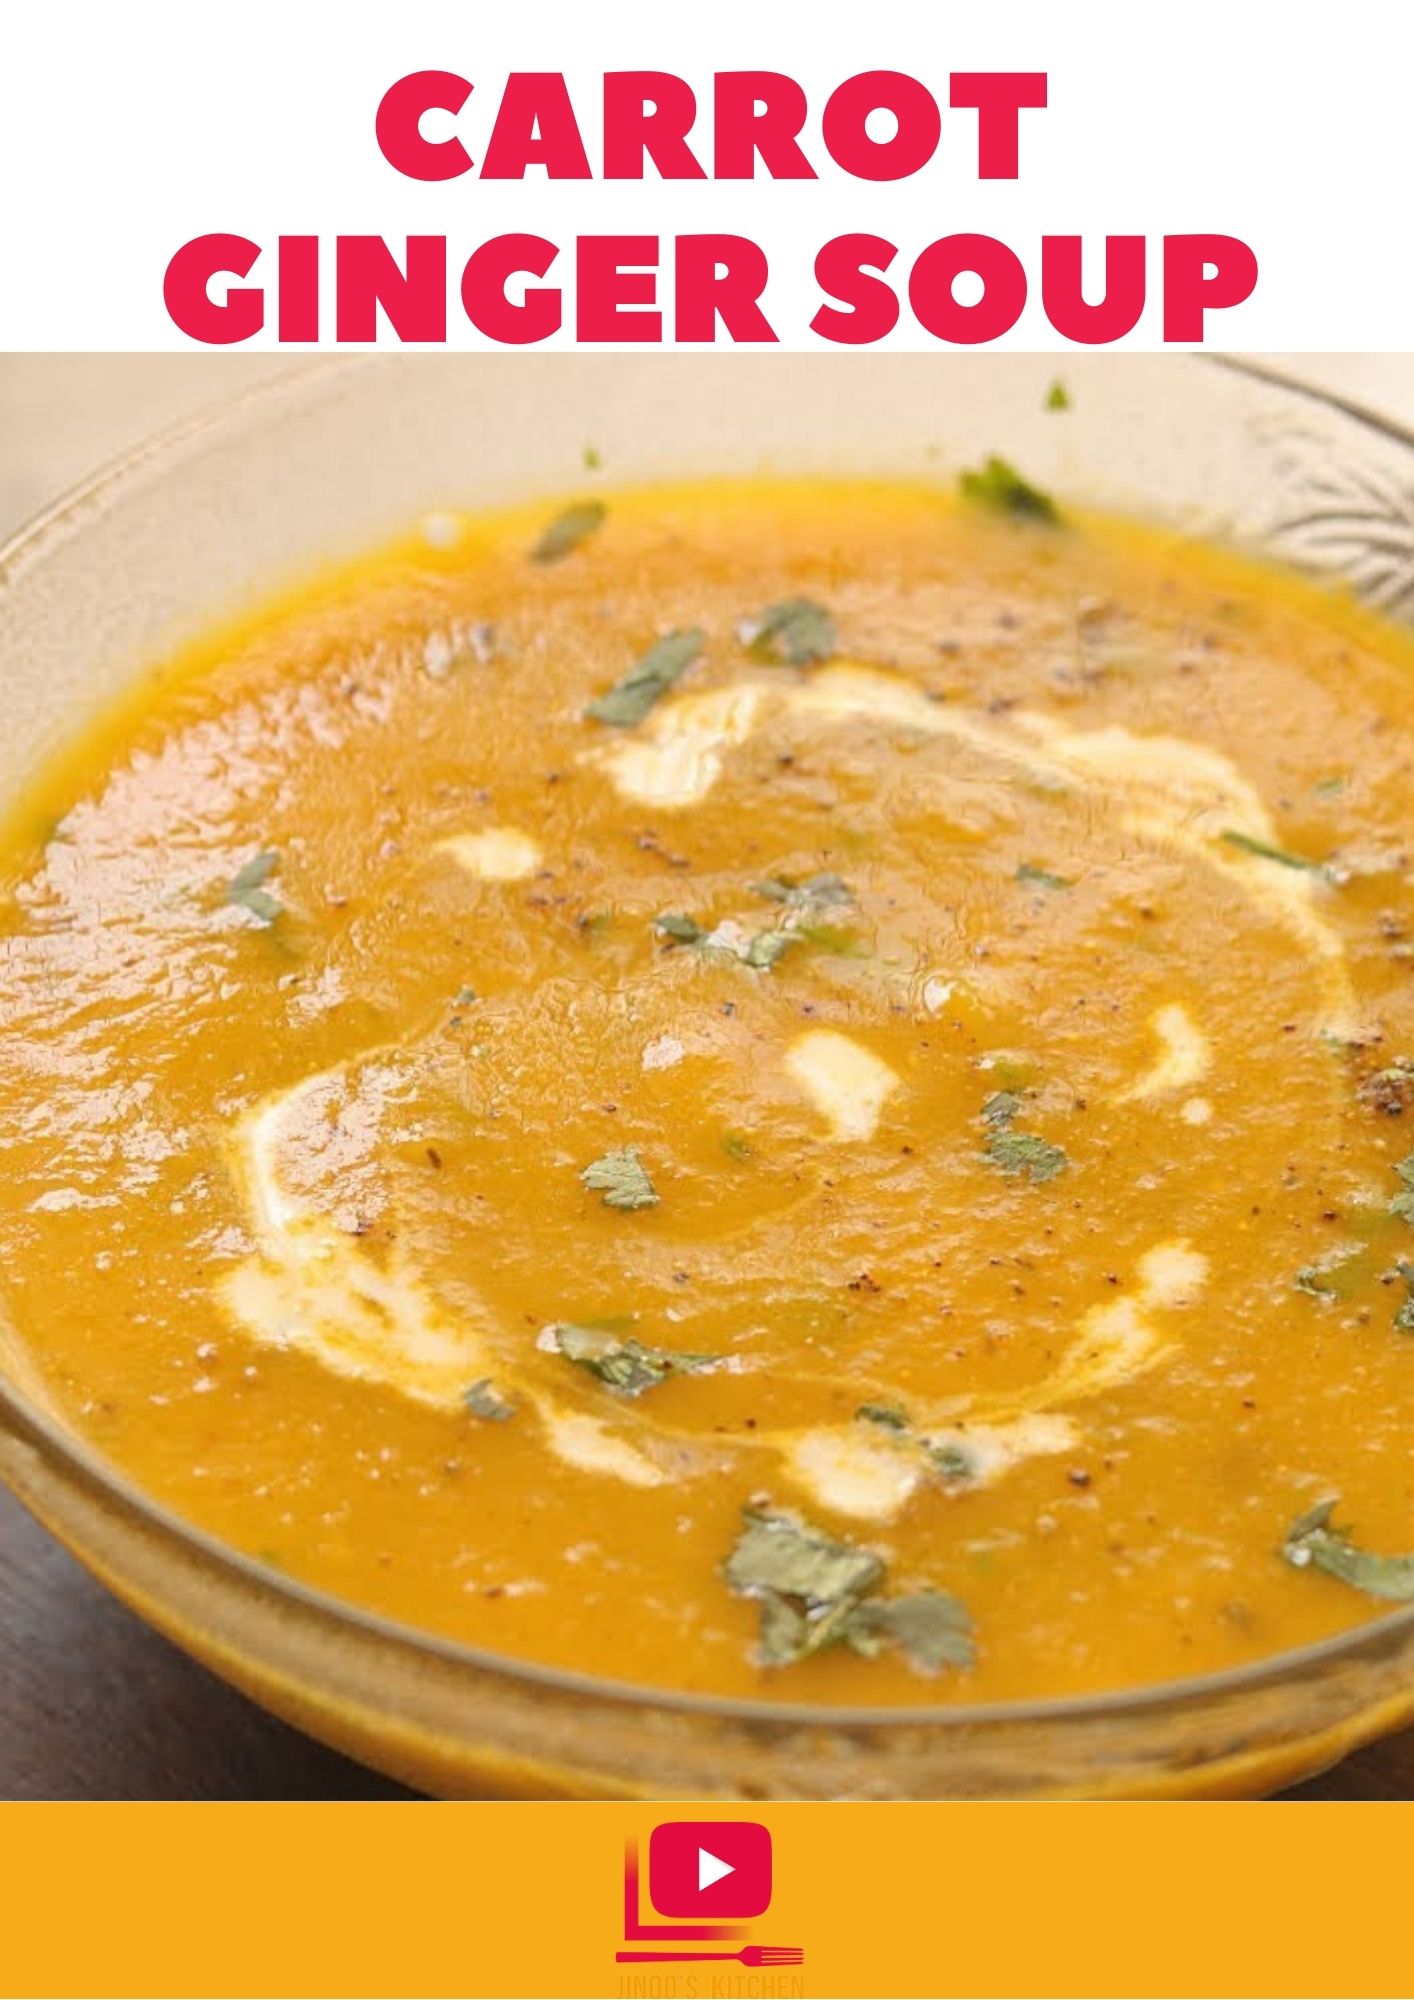 Easy and simple Carrot ginger soup recipe Jinoo's Kitchen